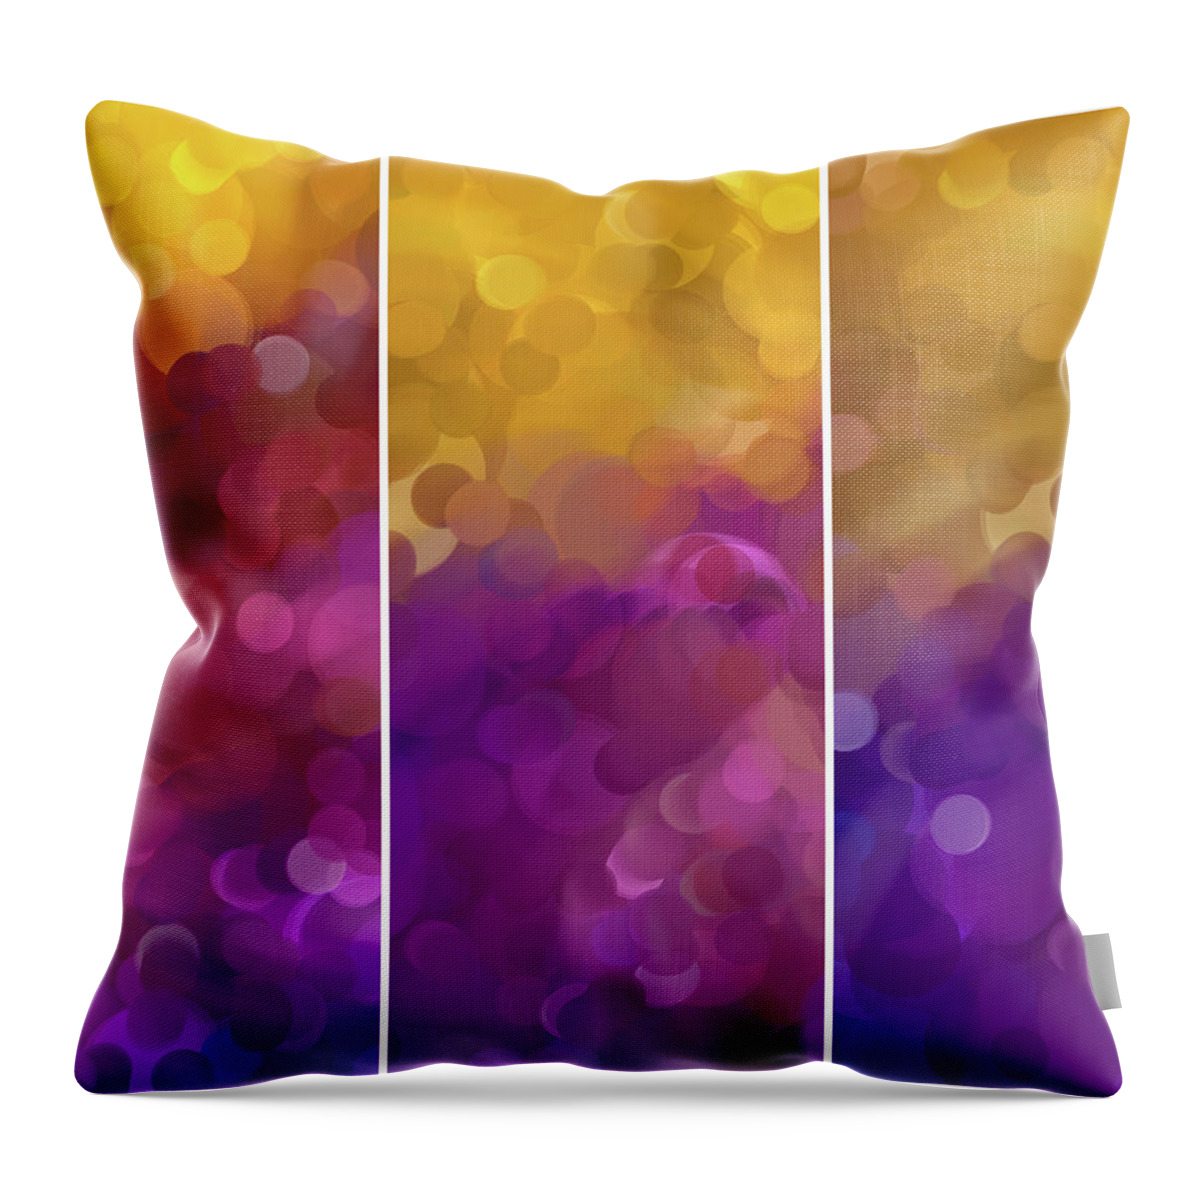 Mindscape Throw Pillow featuring the digital art Mindscape by Tom Druin